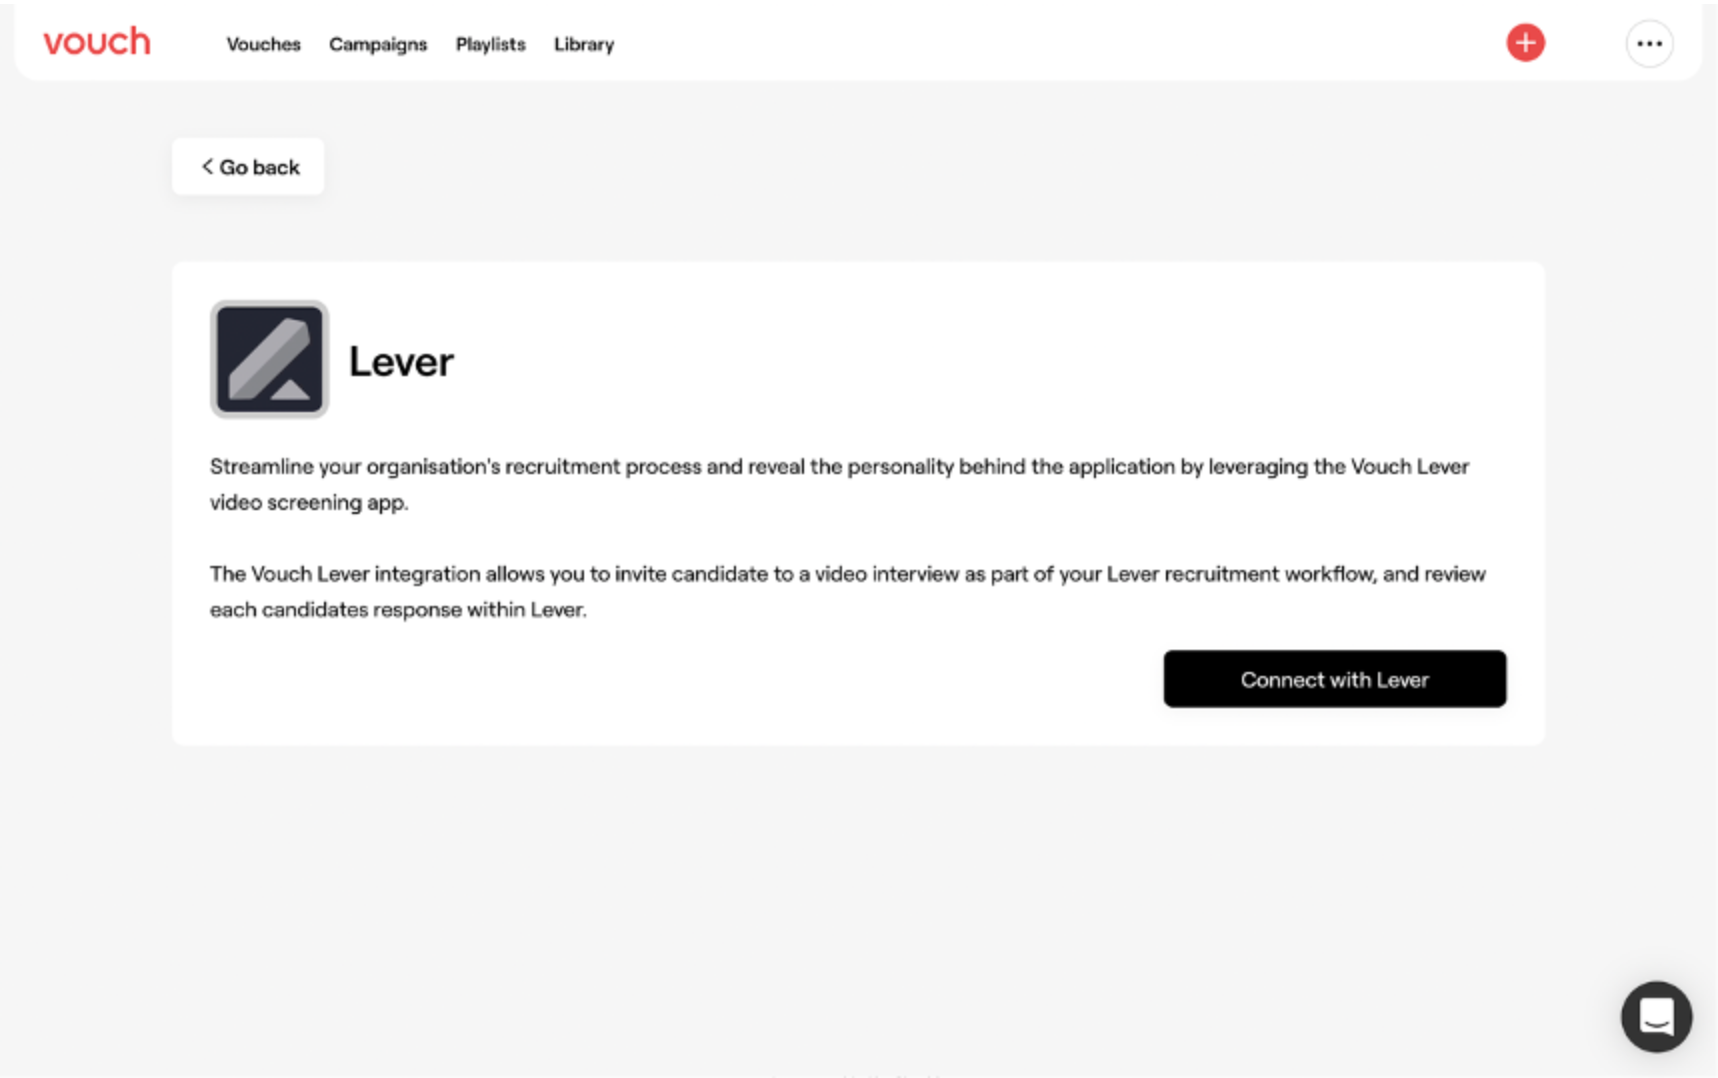 Vouch integrations page showing Lever in the recruitment section with connect with lever button